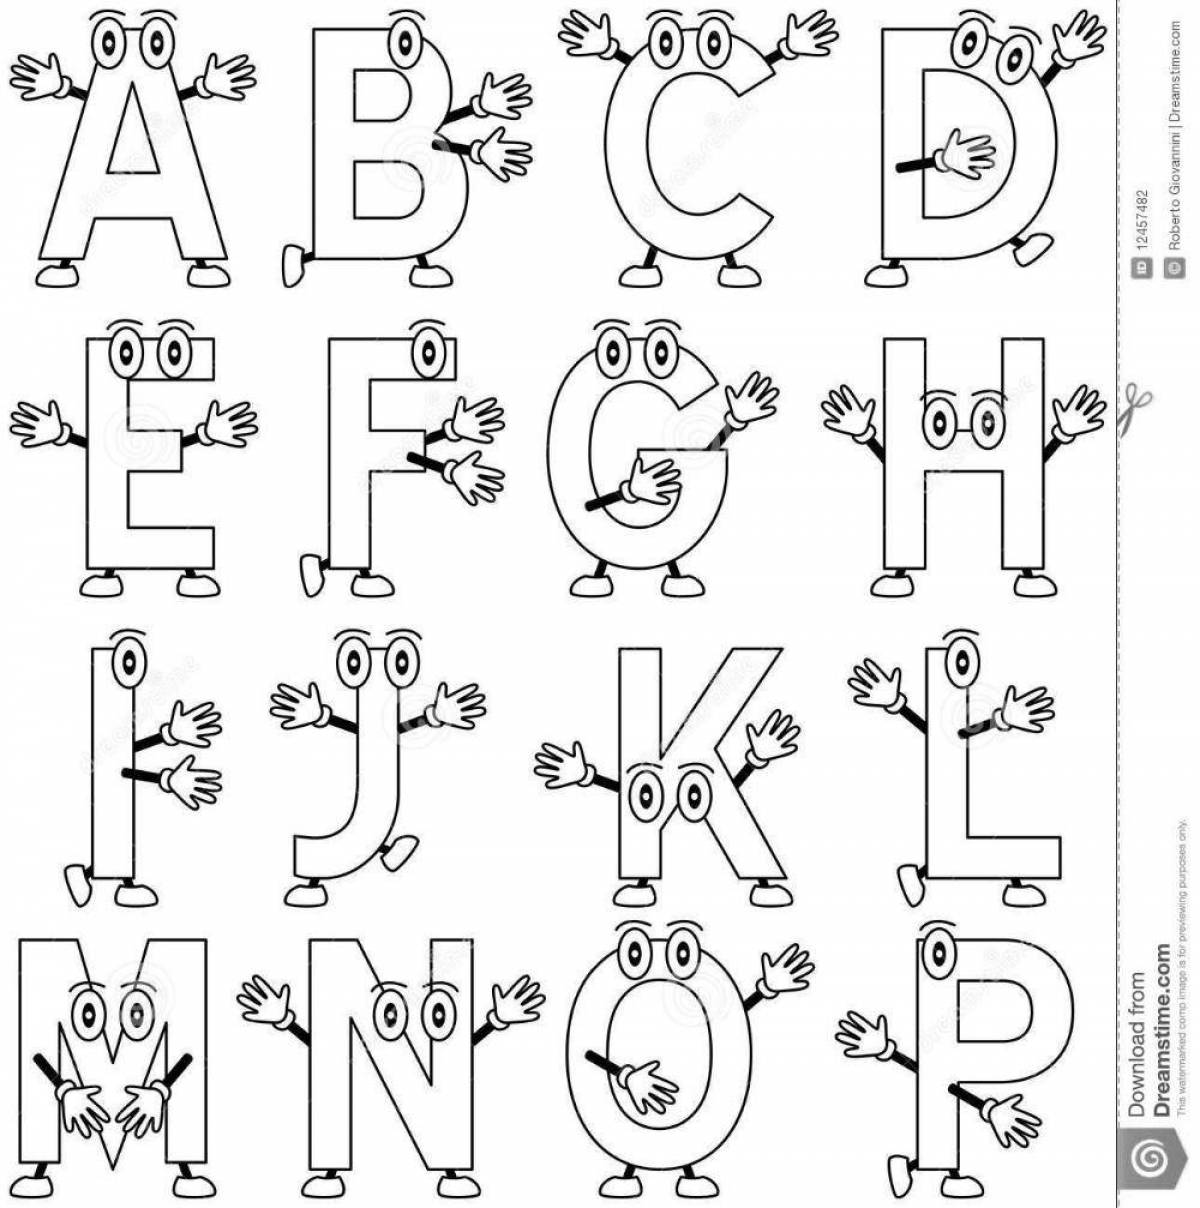 Alphabet knowledge cool coloring